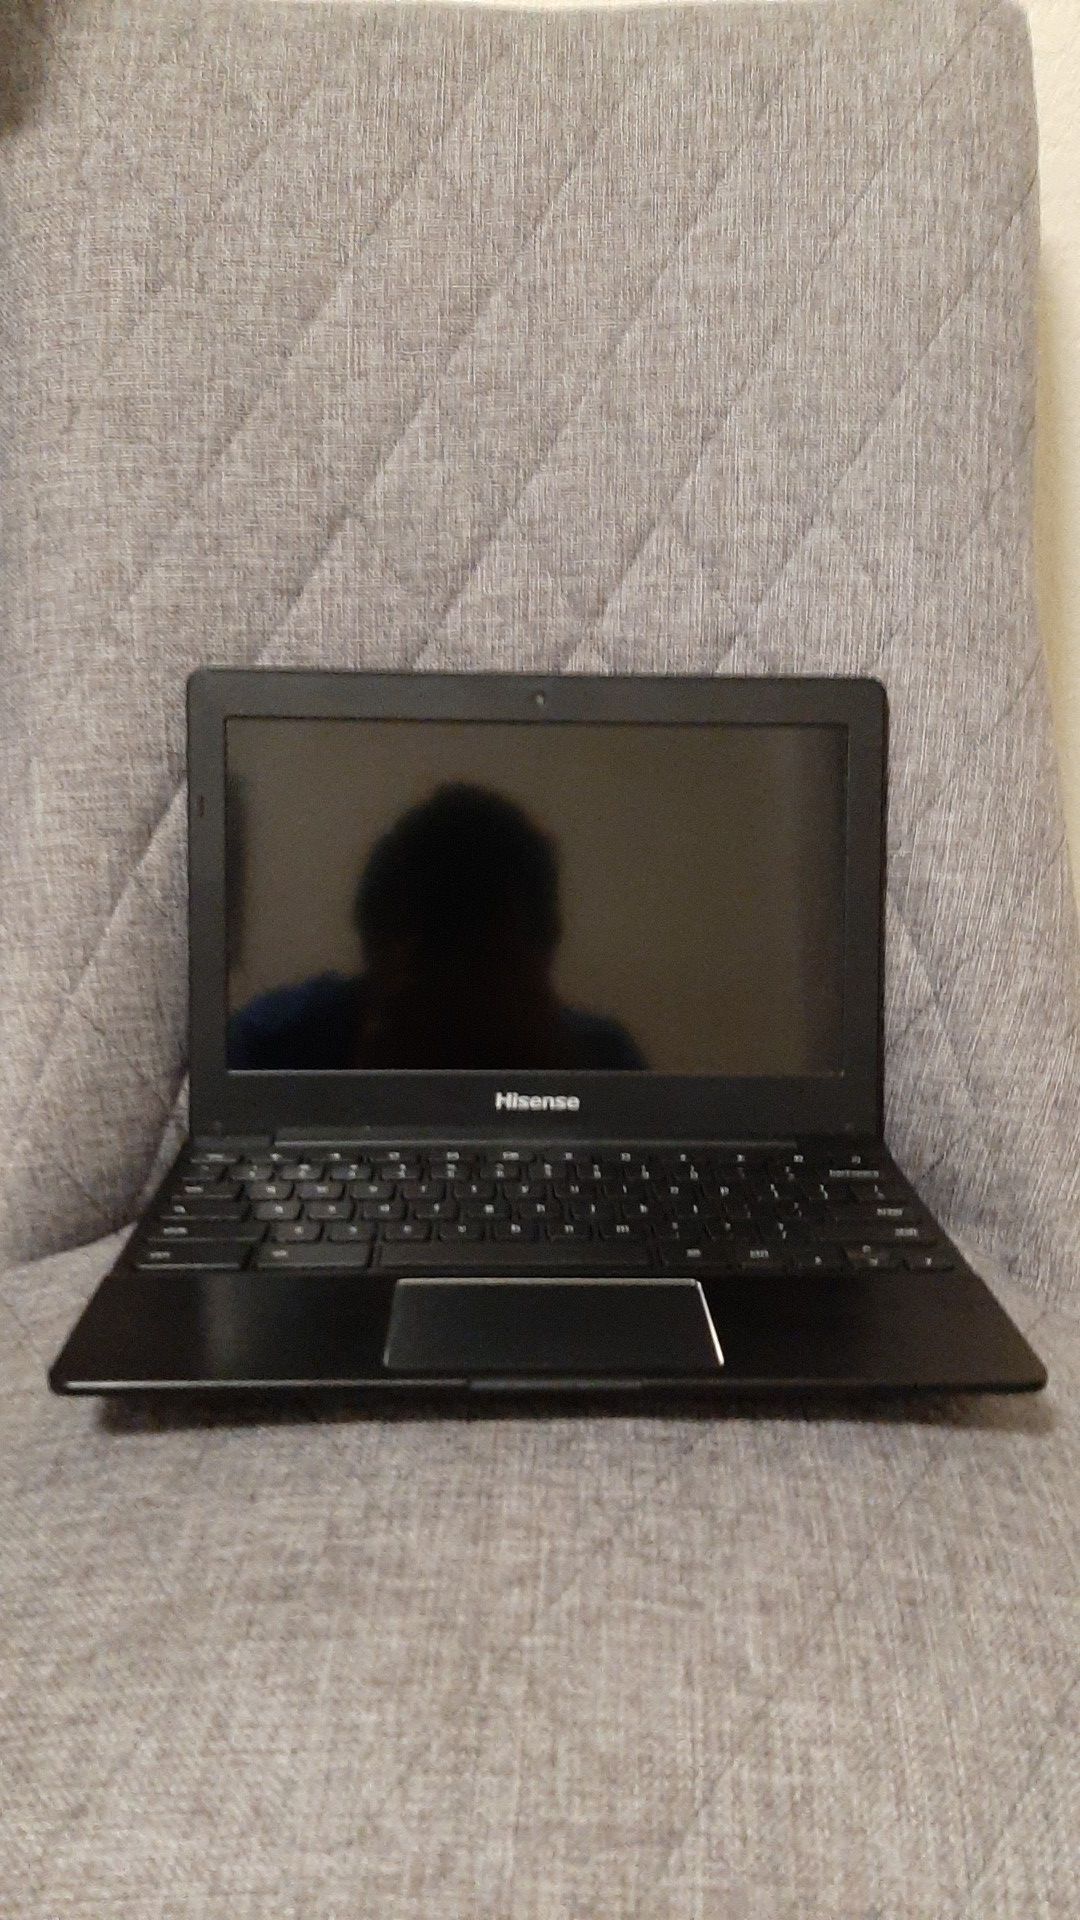 Hisense Chromebook c11 11.6" cloud computer 16GB storage 2GB RAM Charger included